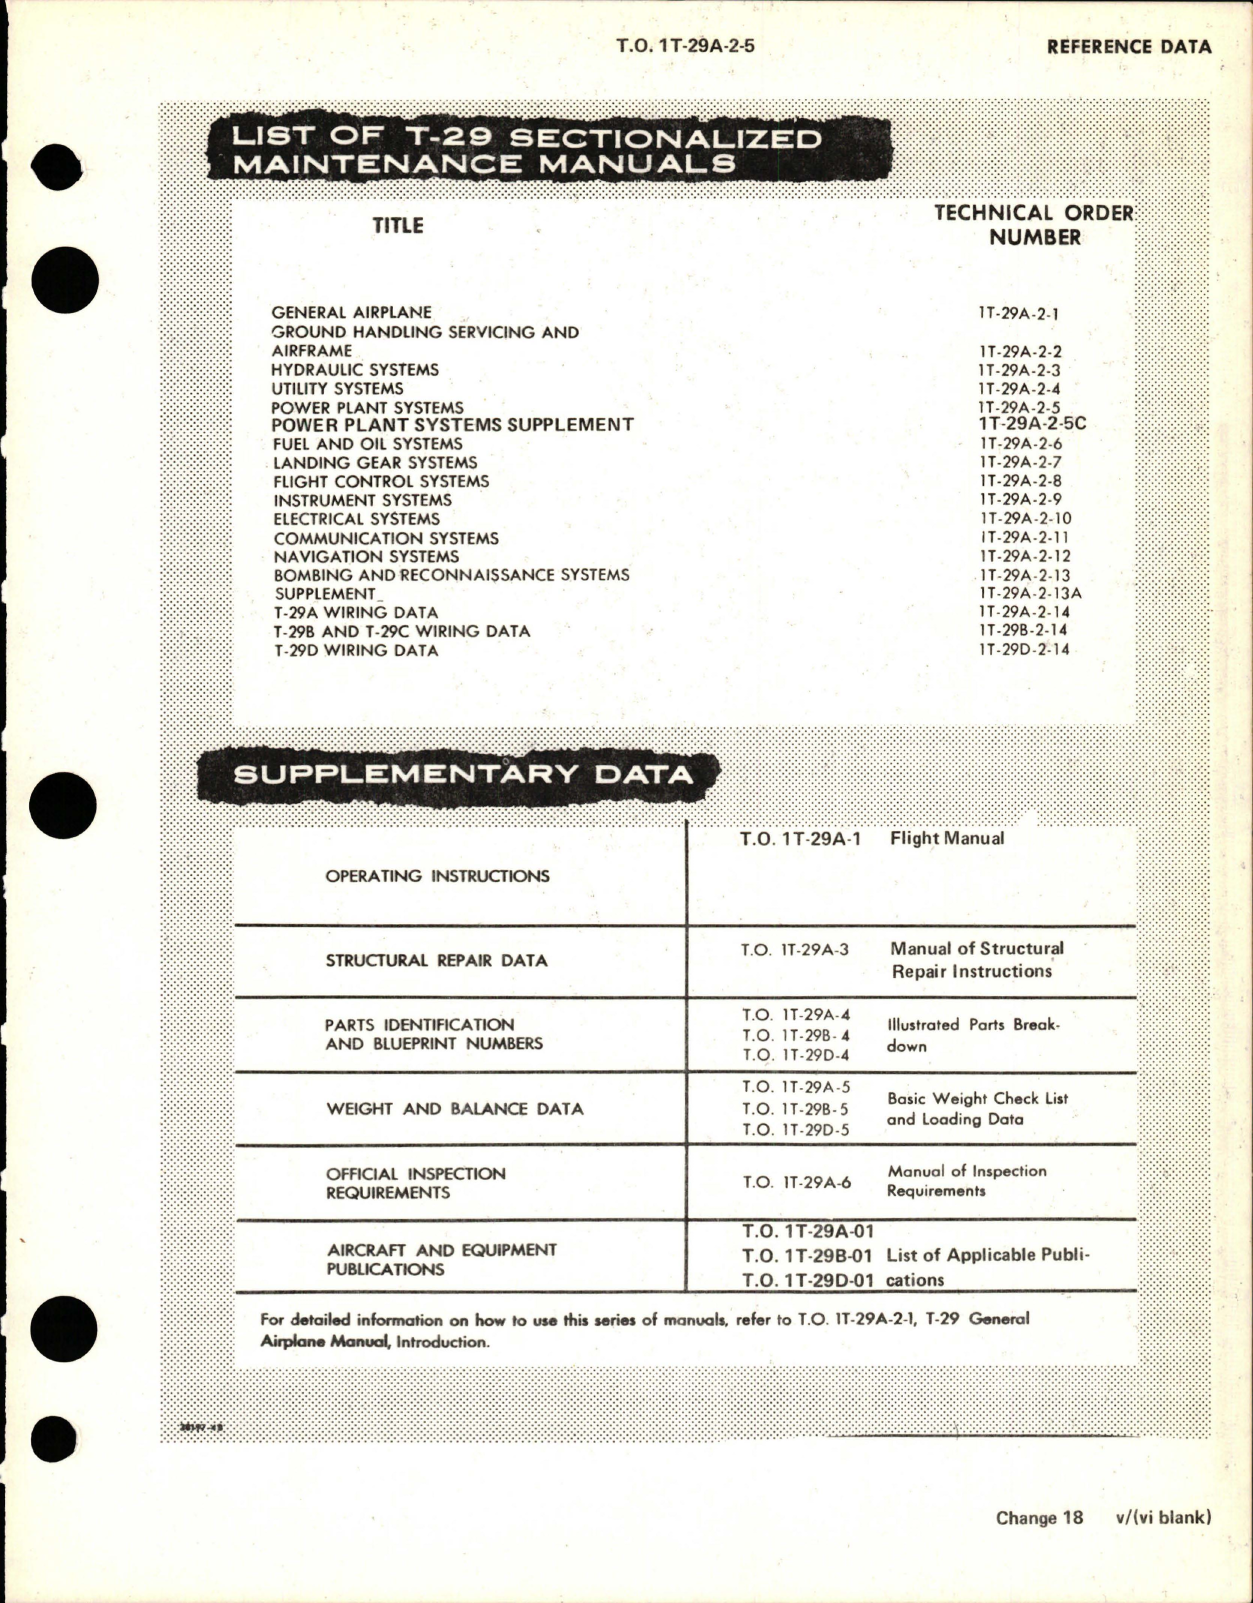 Sample page 9 from AirCorps Library document: Maintenance Manual for Power Plant Systems for T-29A, T-29B, T-29C and T-29D